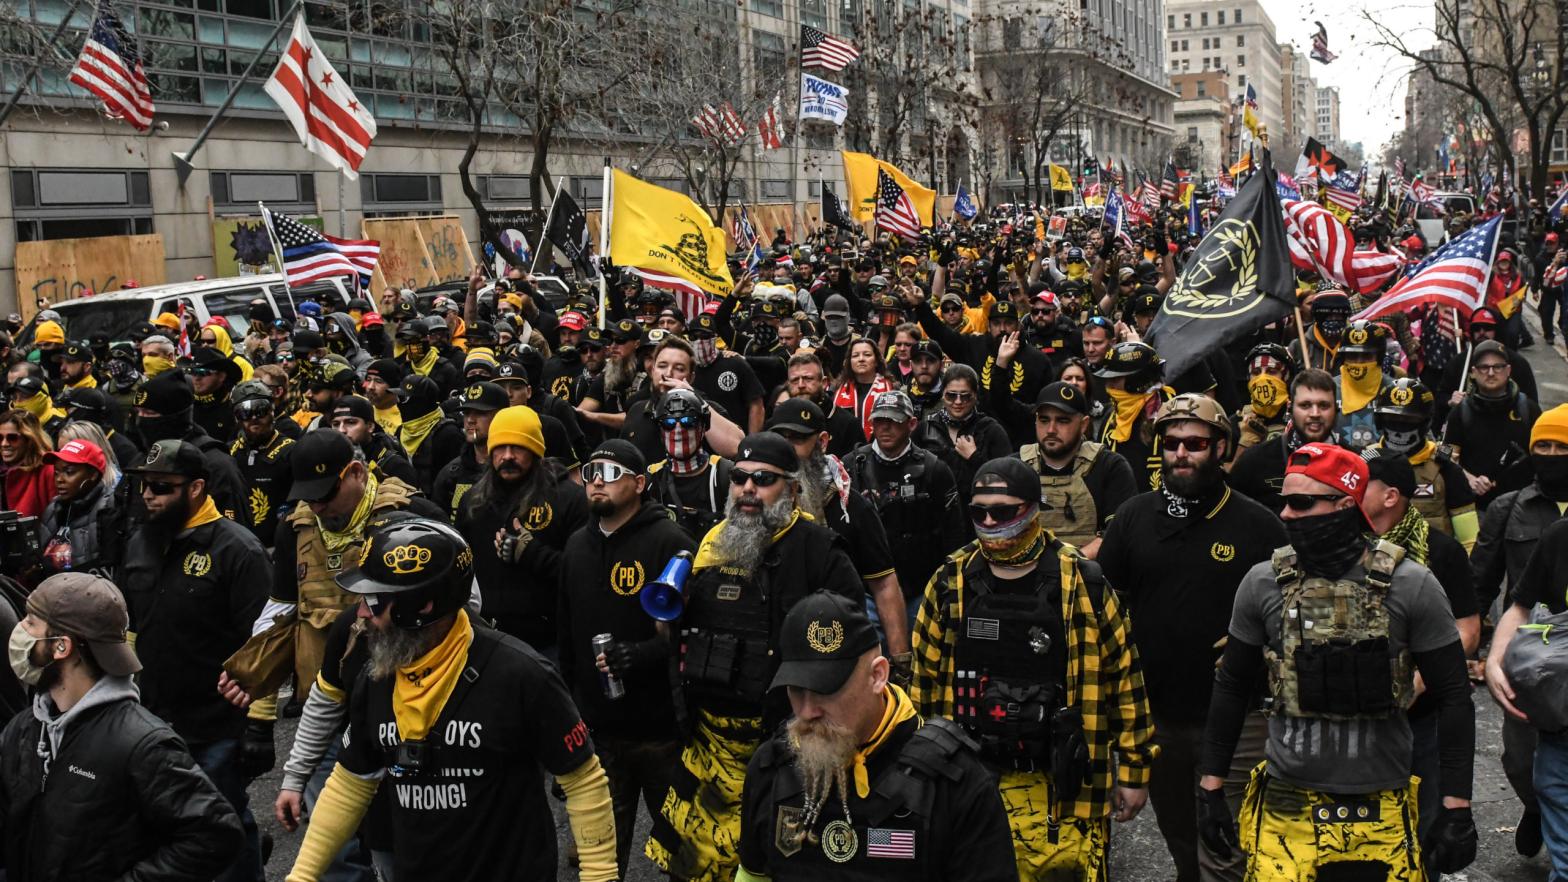 Members of the Proud Boys march towards Freedom Plaza during a protest on December 12, 2020 in Washington, DC. Thousands of protesters who refuse to accept that President-elect Joe Biden won the election are rallying ahead of the electoral college vote to make Trump's 306-to-232 loss official.  (Photo: Stephanie Keith, Getty Images)